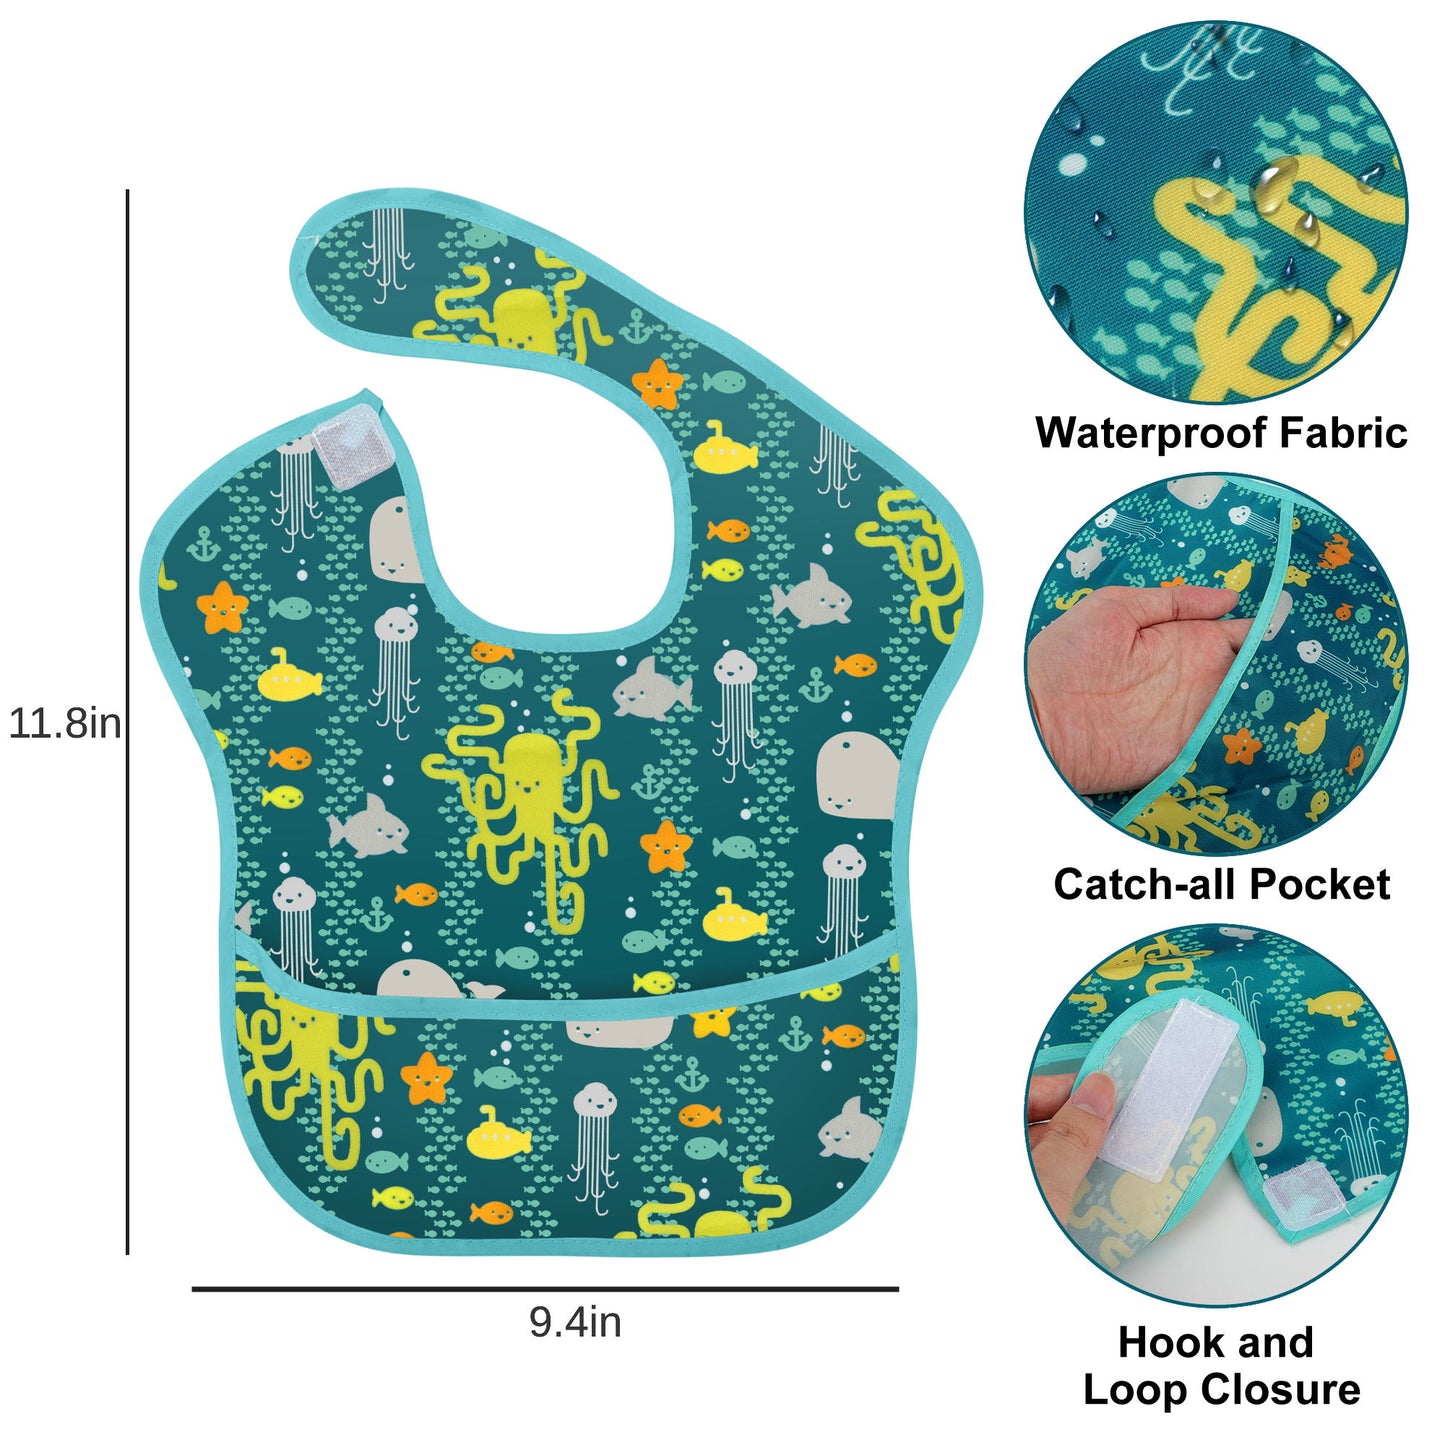 3 PCS Adjustable Waterproof Baby Bibs for Toddlers 6-24 Months，Stain-Resistant Fabric, Crumb Catcher Pocket,Cartoon Animals Patterns (Whale, Umbrella, Octopus )